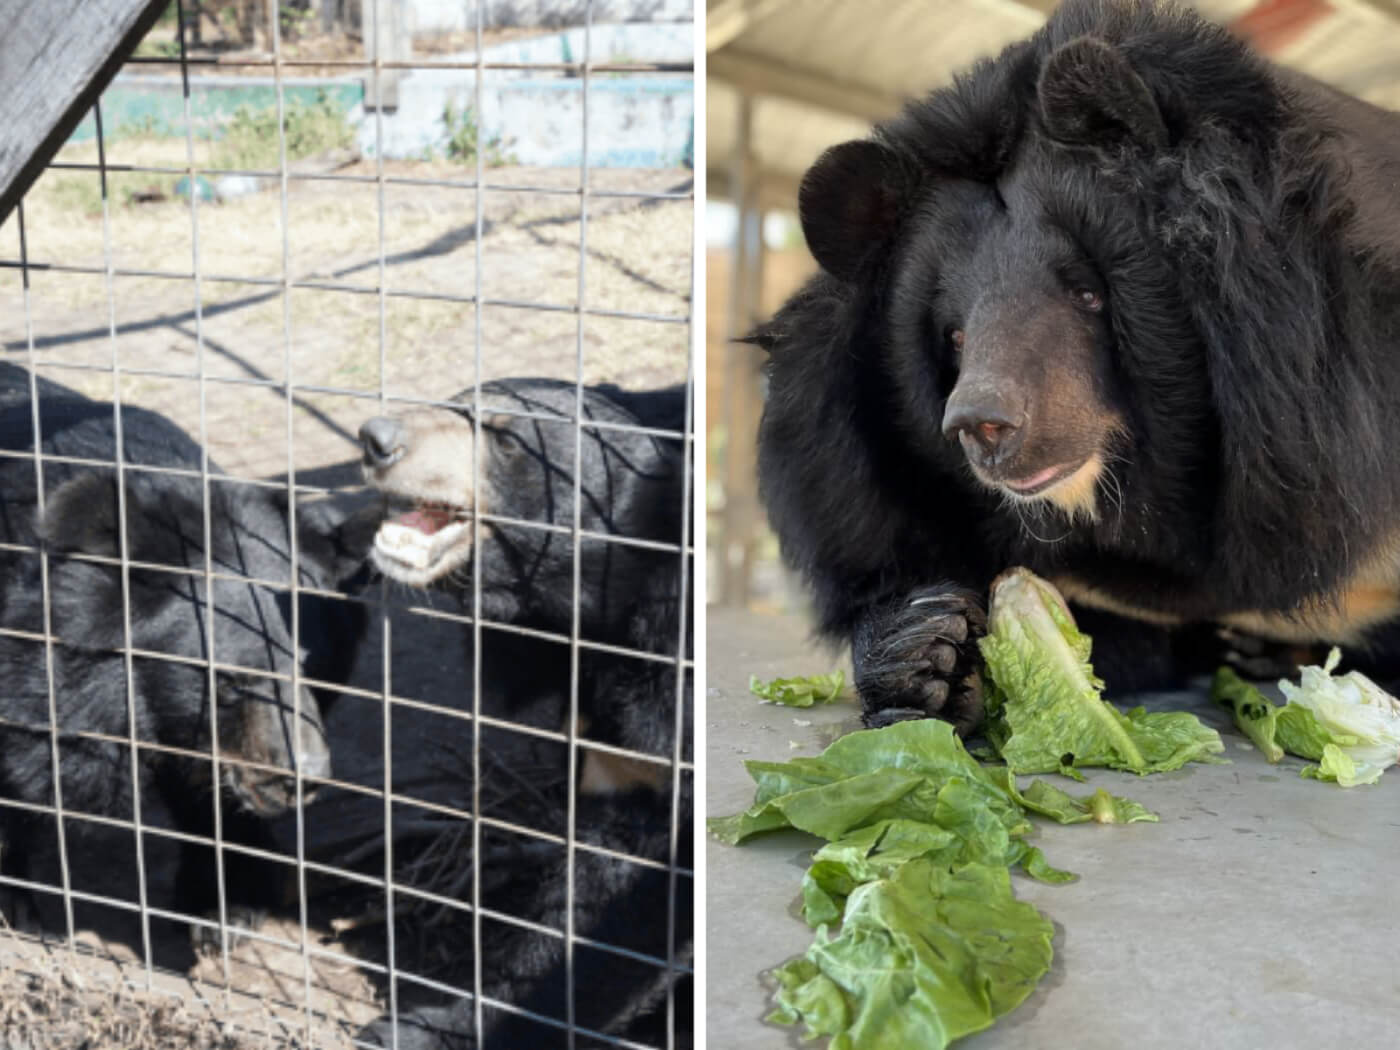 2-up photo composite: on the left, two asiatic bears at tri-state zoo behind a wire fence. on the right, one of the bears appears healthier, eating lettuce from tthe floor of his clean quarantine room in sanctuary